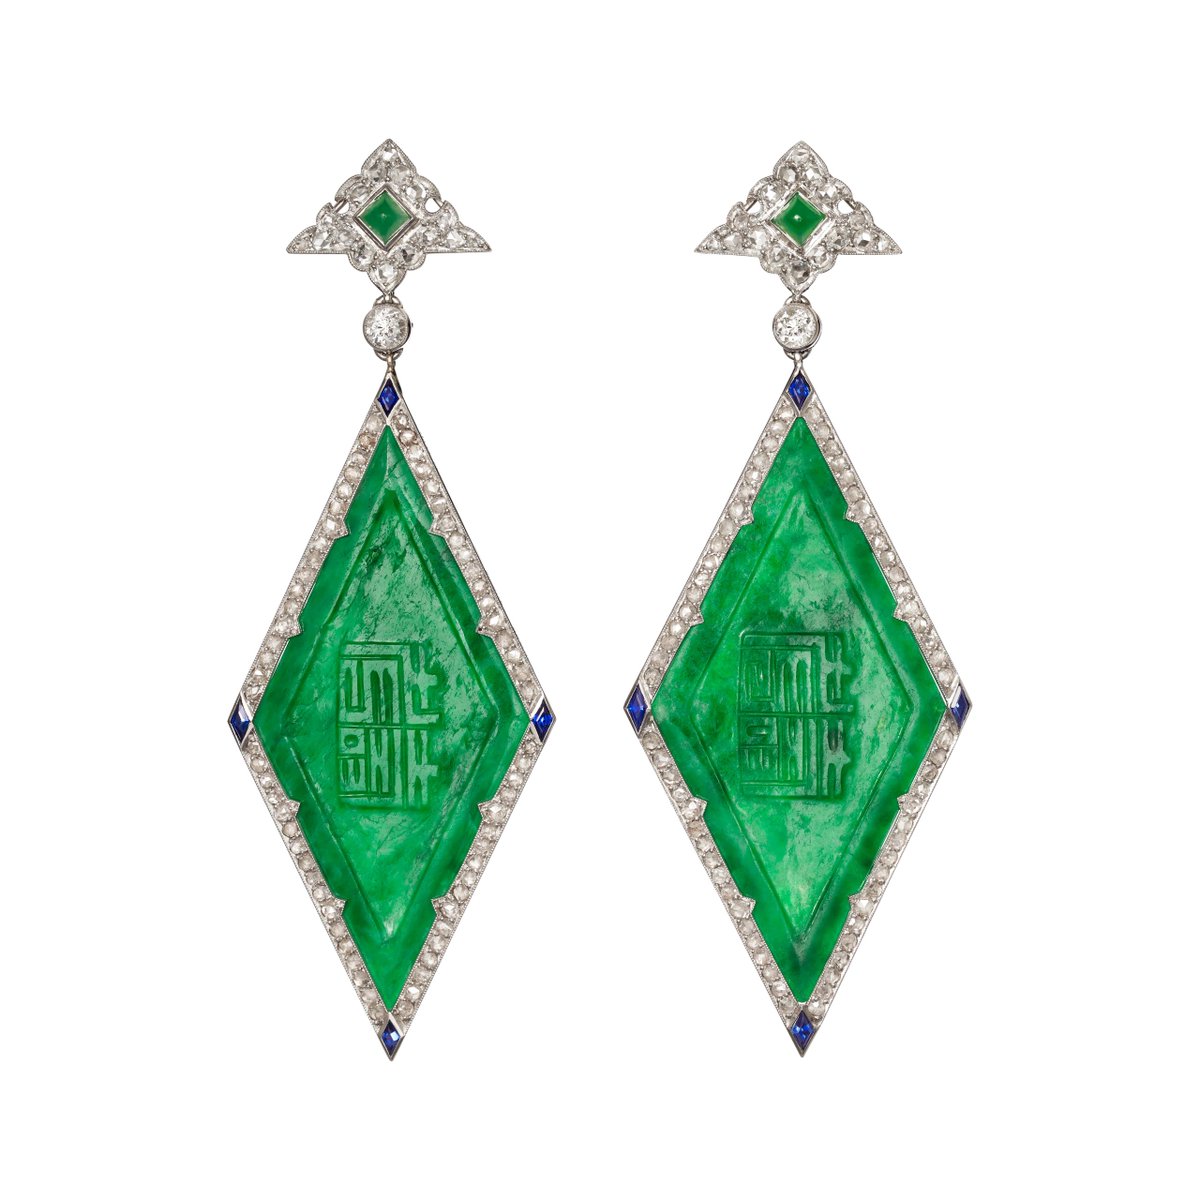 I'm telling you, if you ever want jewelry, hit an antique store before you do anything else. These MIGHT be emerald, but I lean toward jade with the engraving. The blue at the corners (lapis or sapphire?) is a great touch.